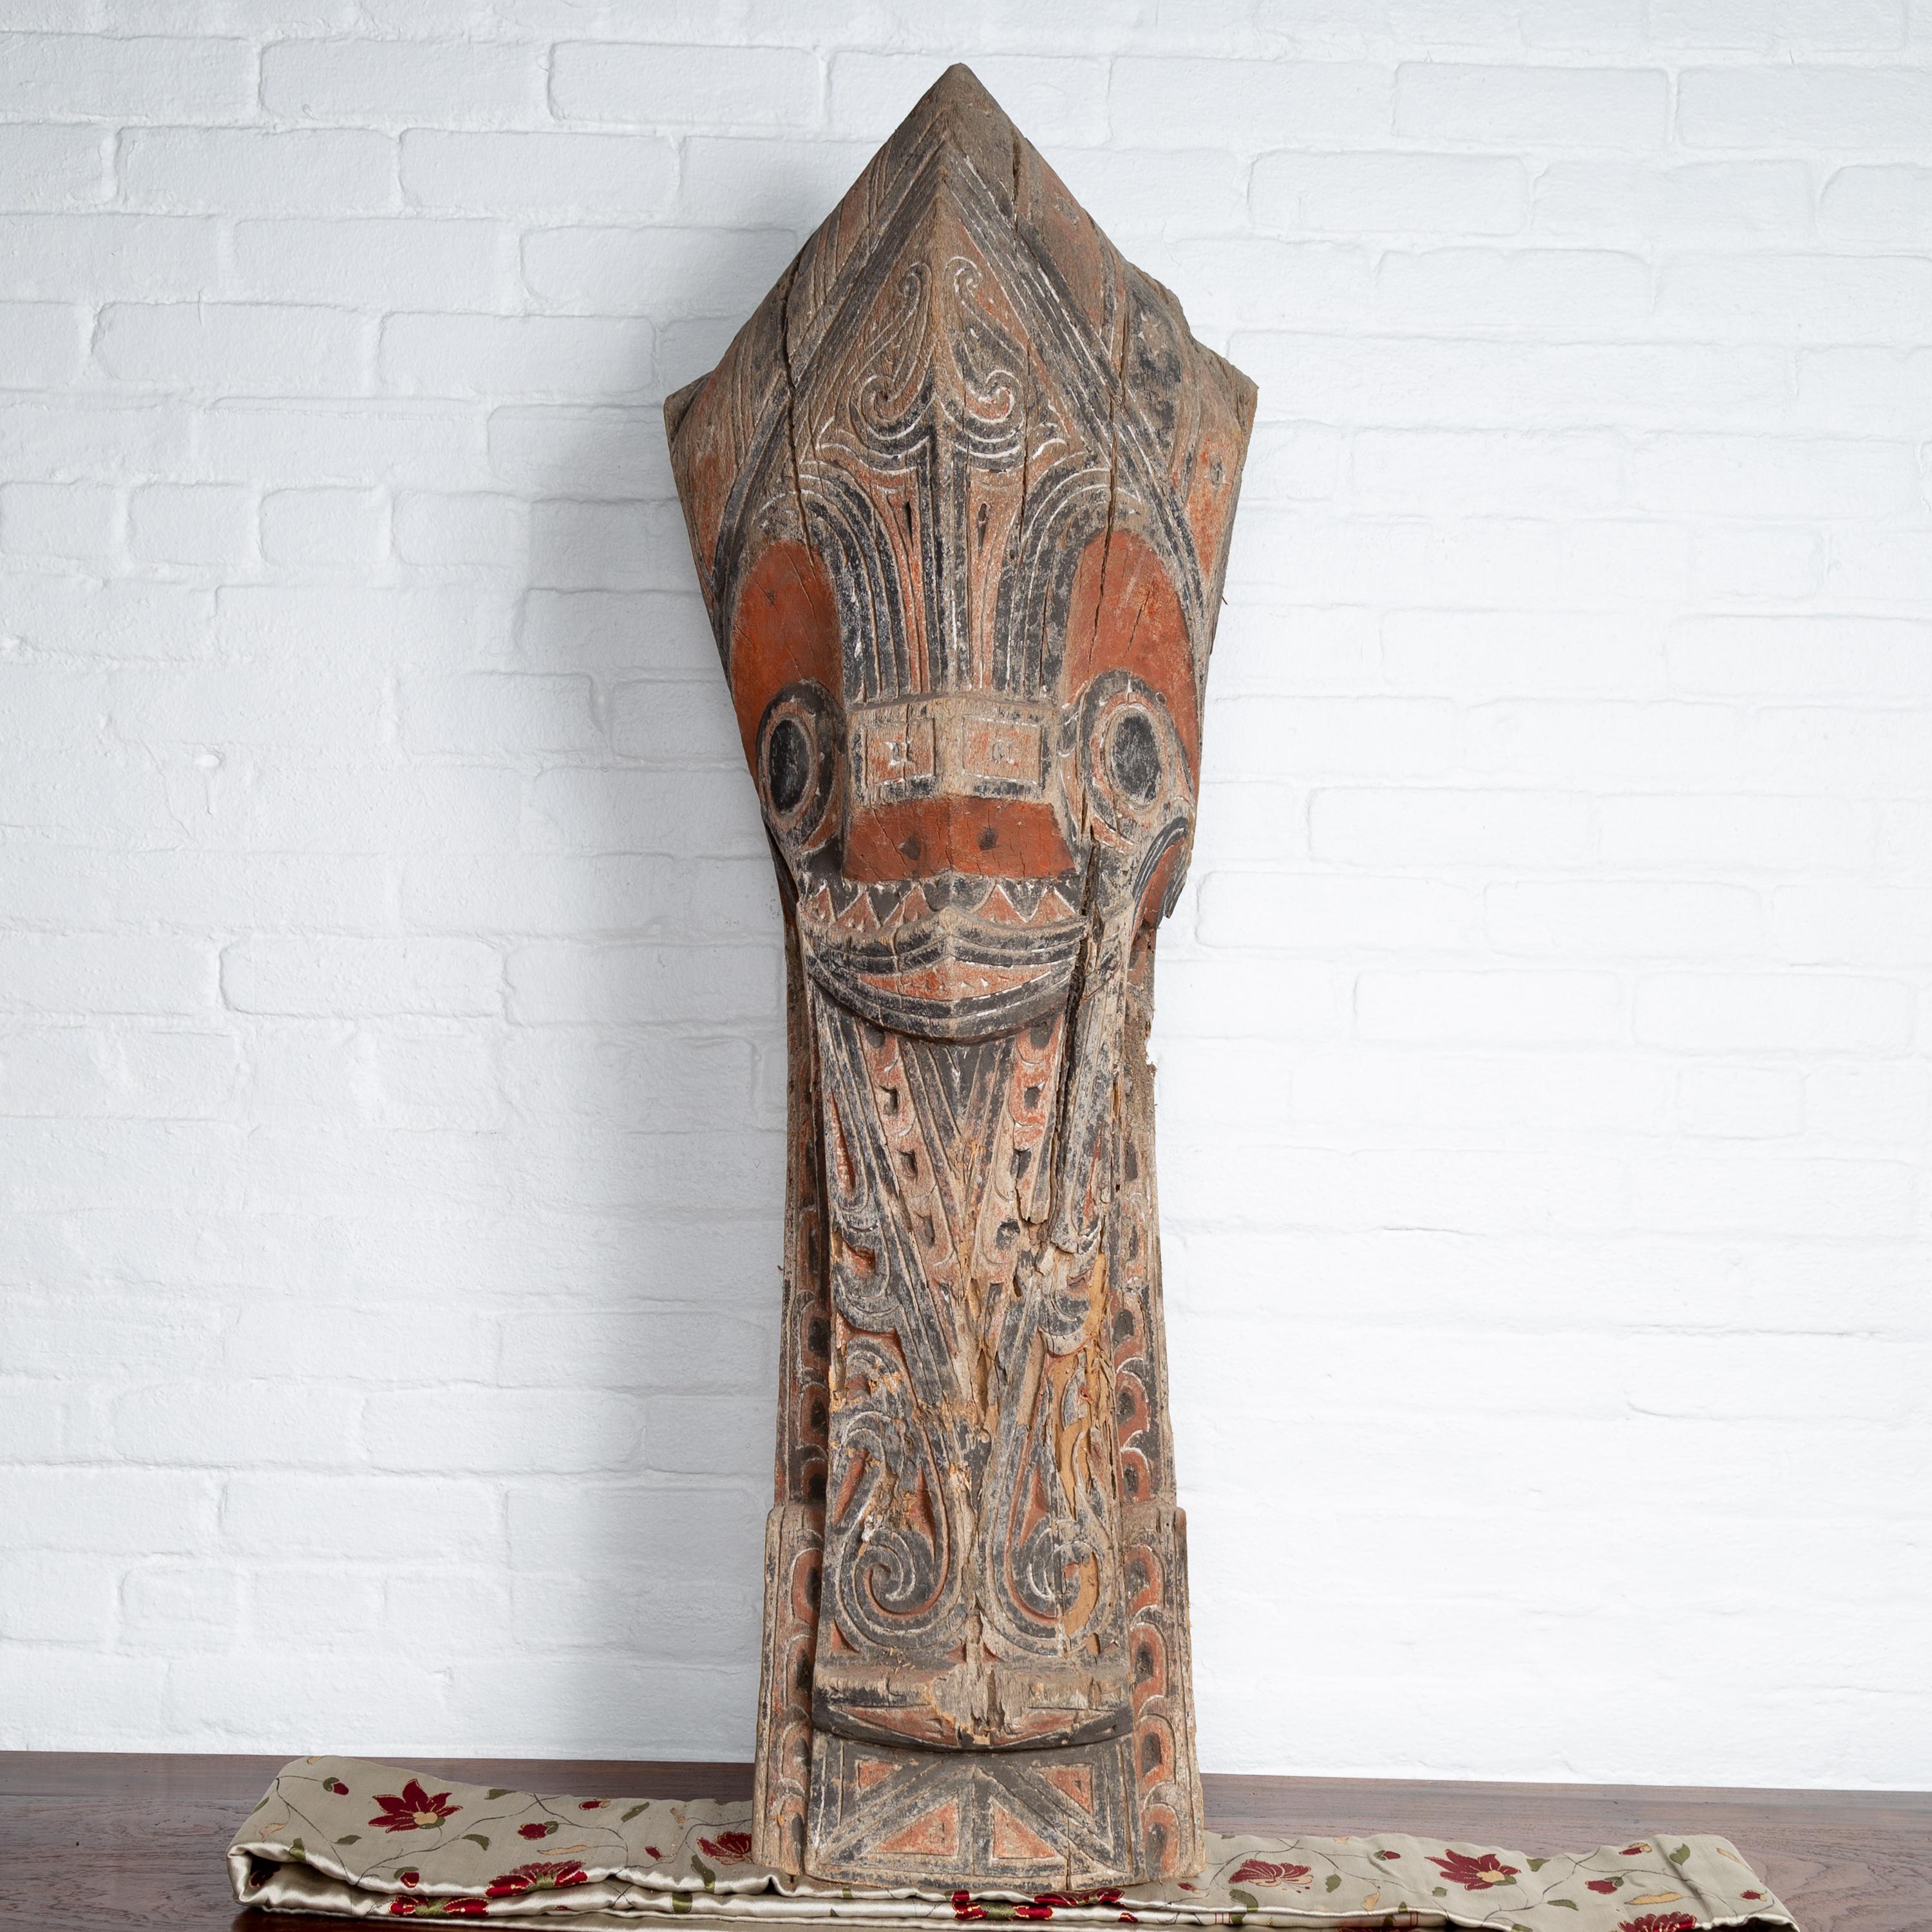 A large antique hand carved tribal carving from the Batak People, northern Sumatra, called a Singa Singa. Attracting our eye with its charismatic presence, this large hand carved sculpture from the Indonesian island of Sumatra is one of the most